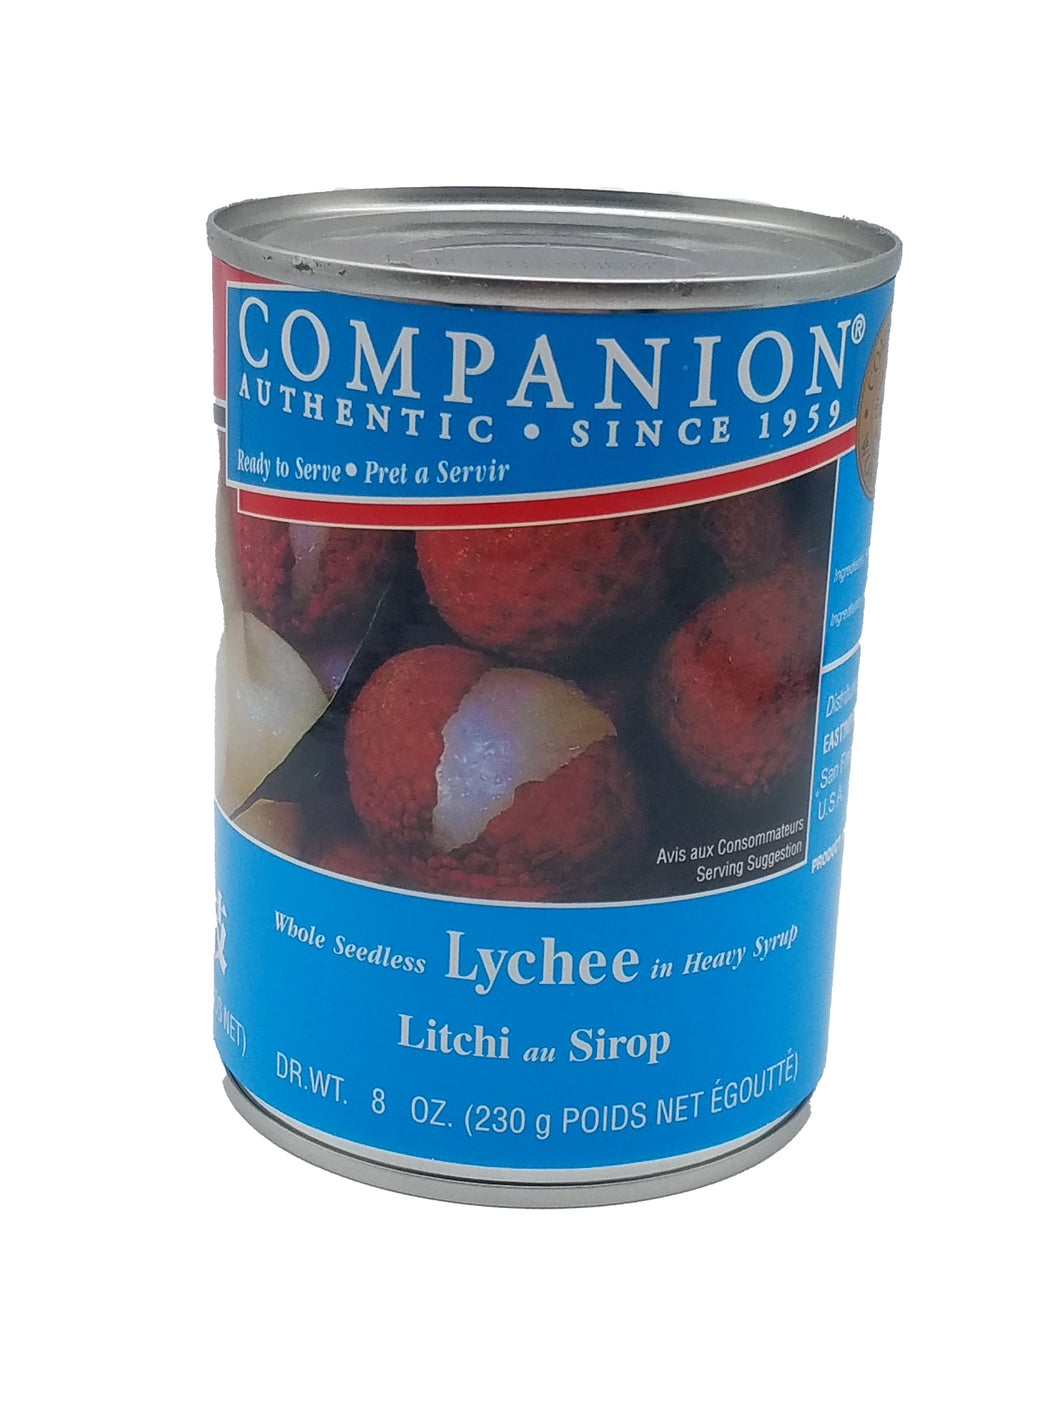 Companion Whole Lychee in Syrup